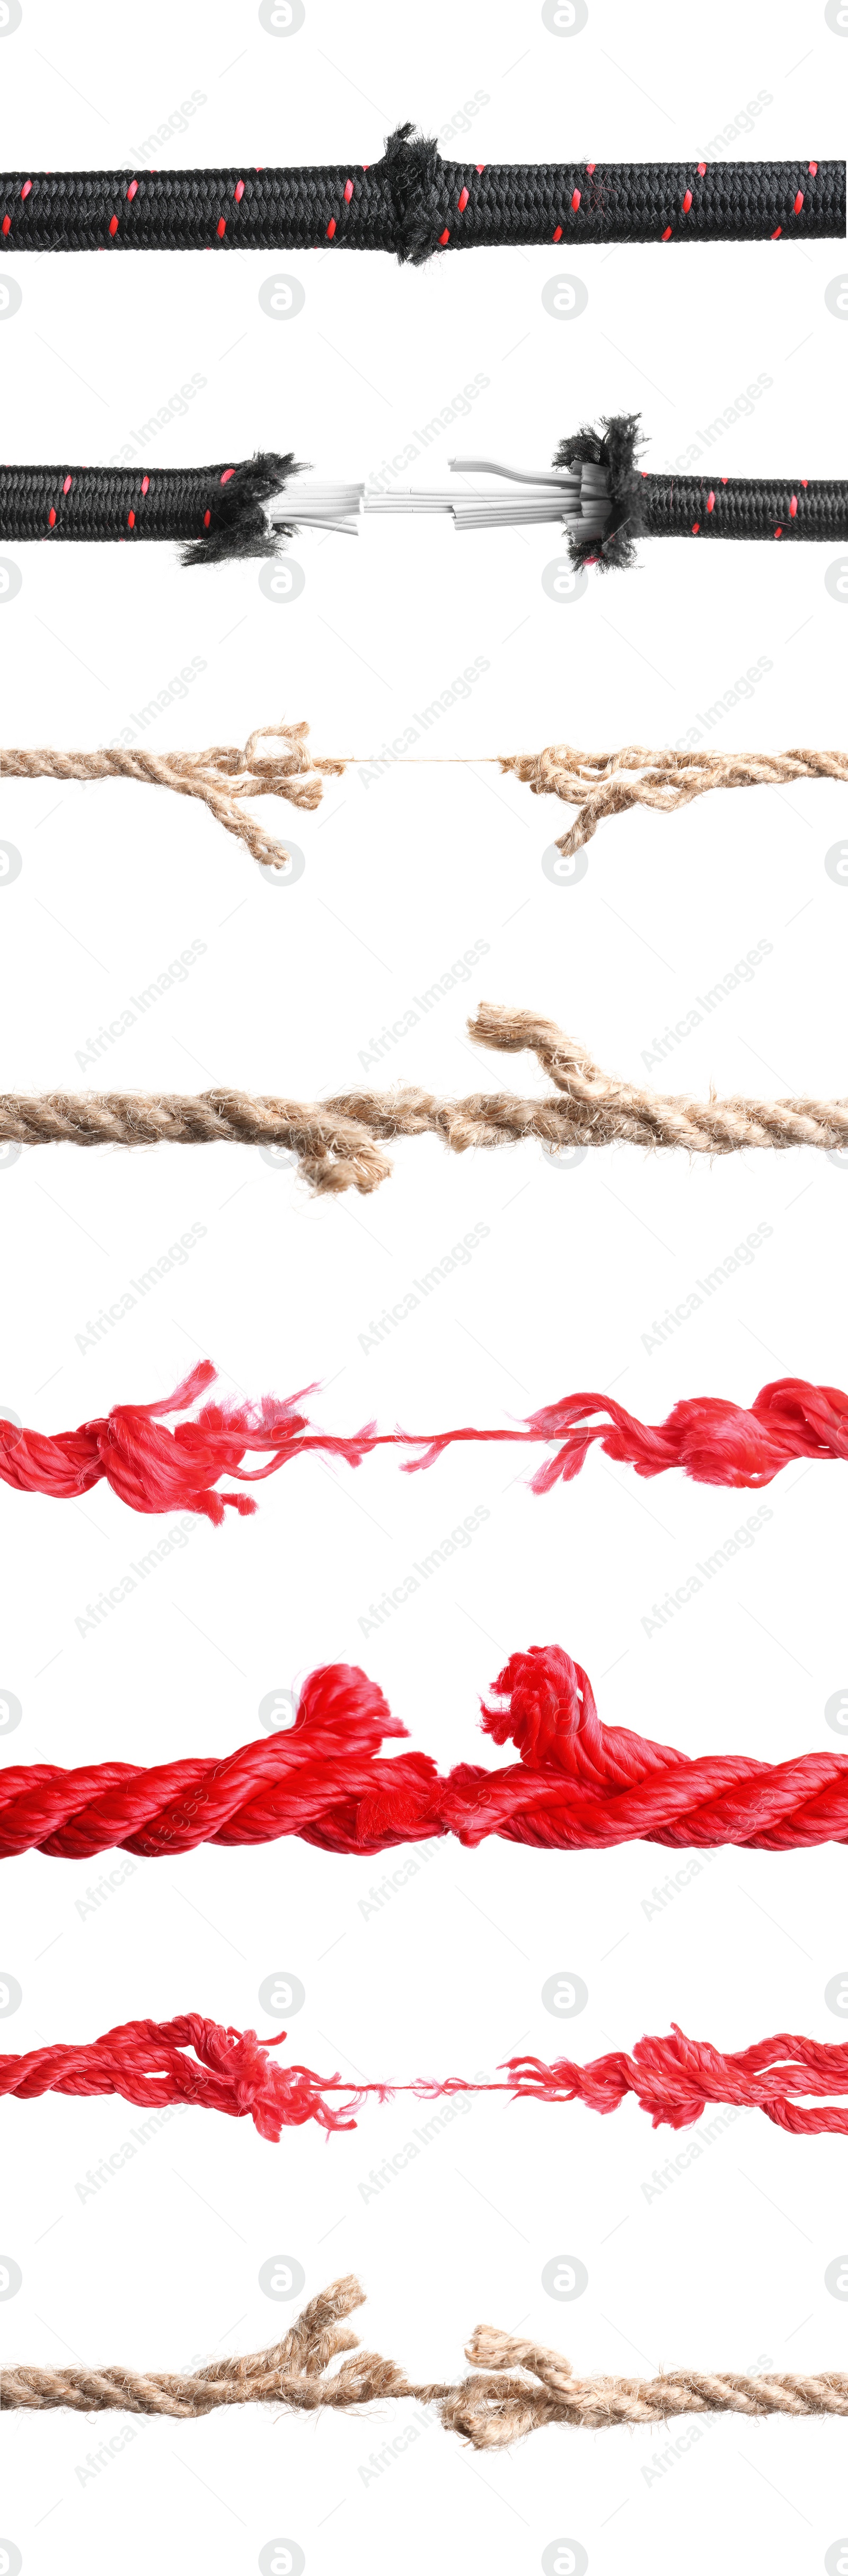 Image of Collage with ruptures of different ropes on white background